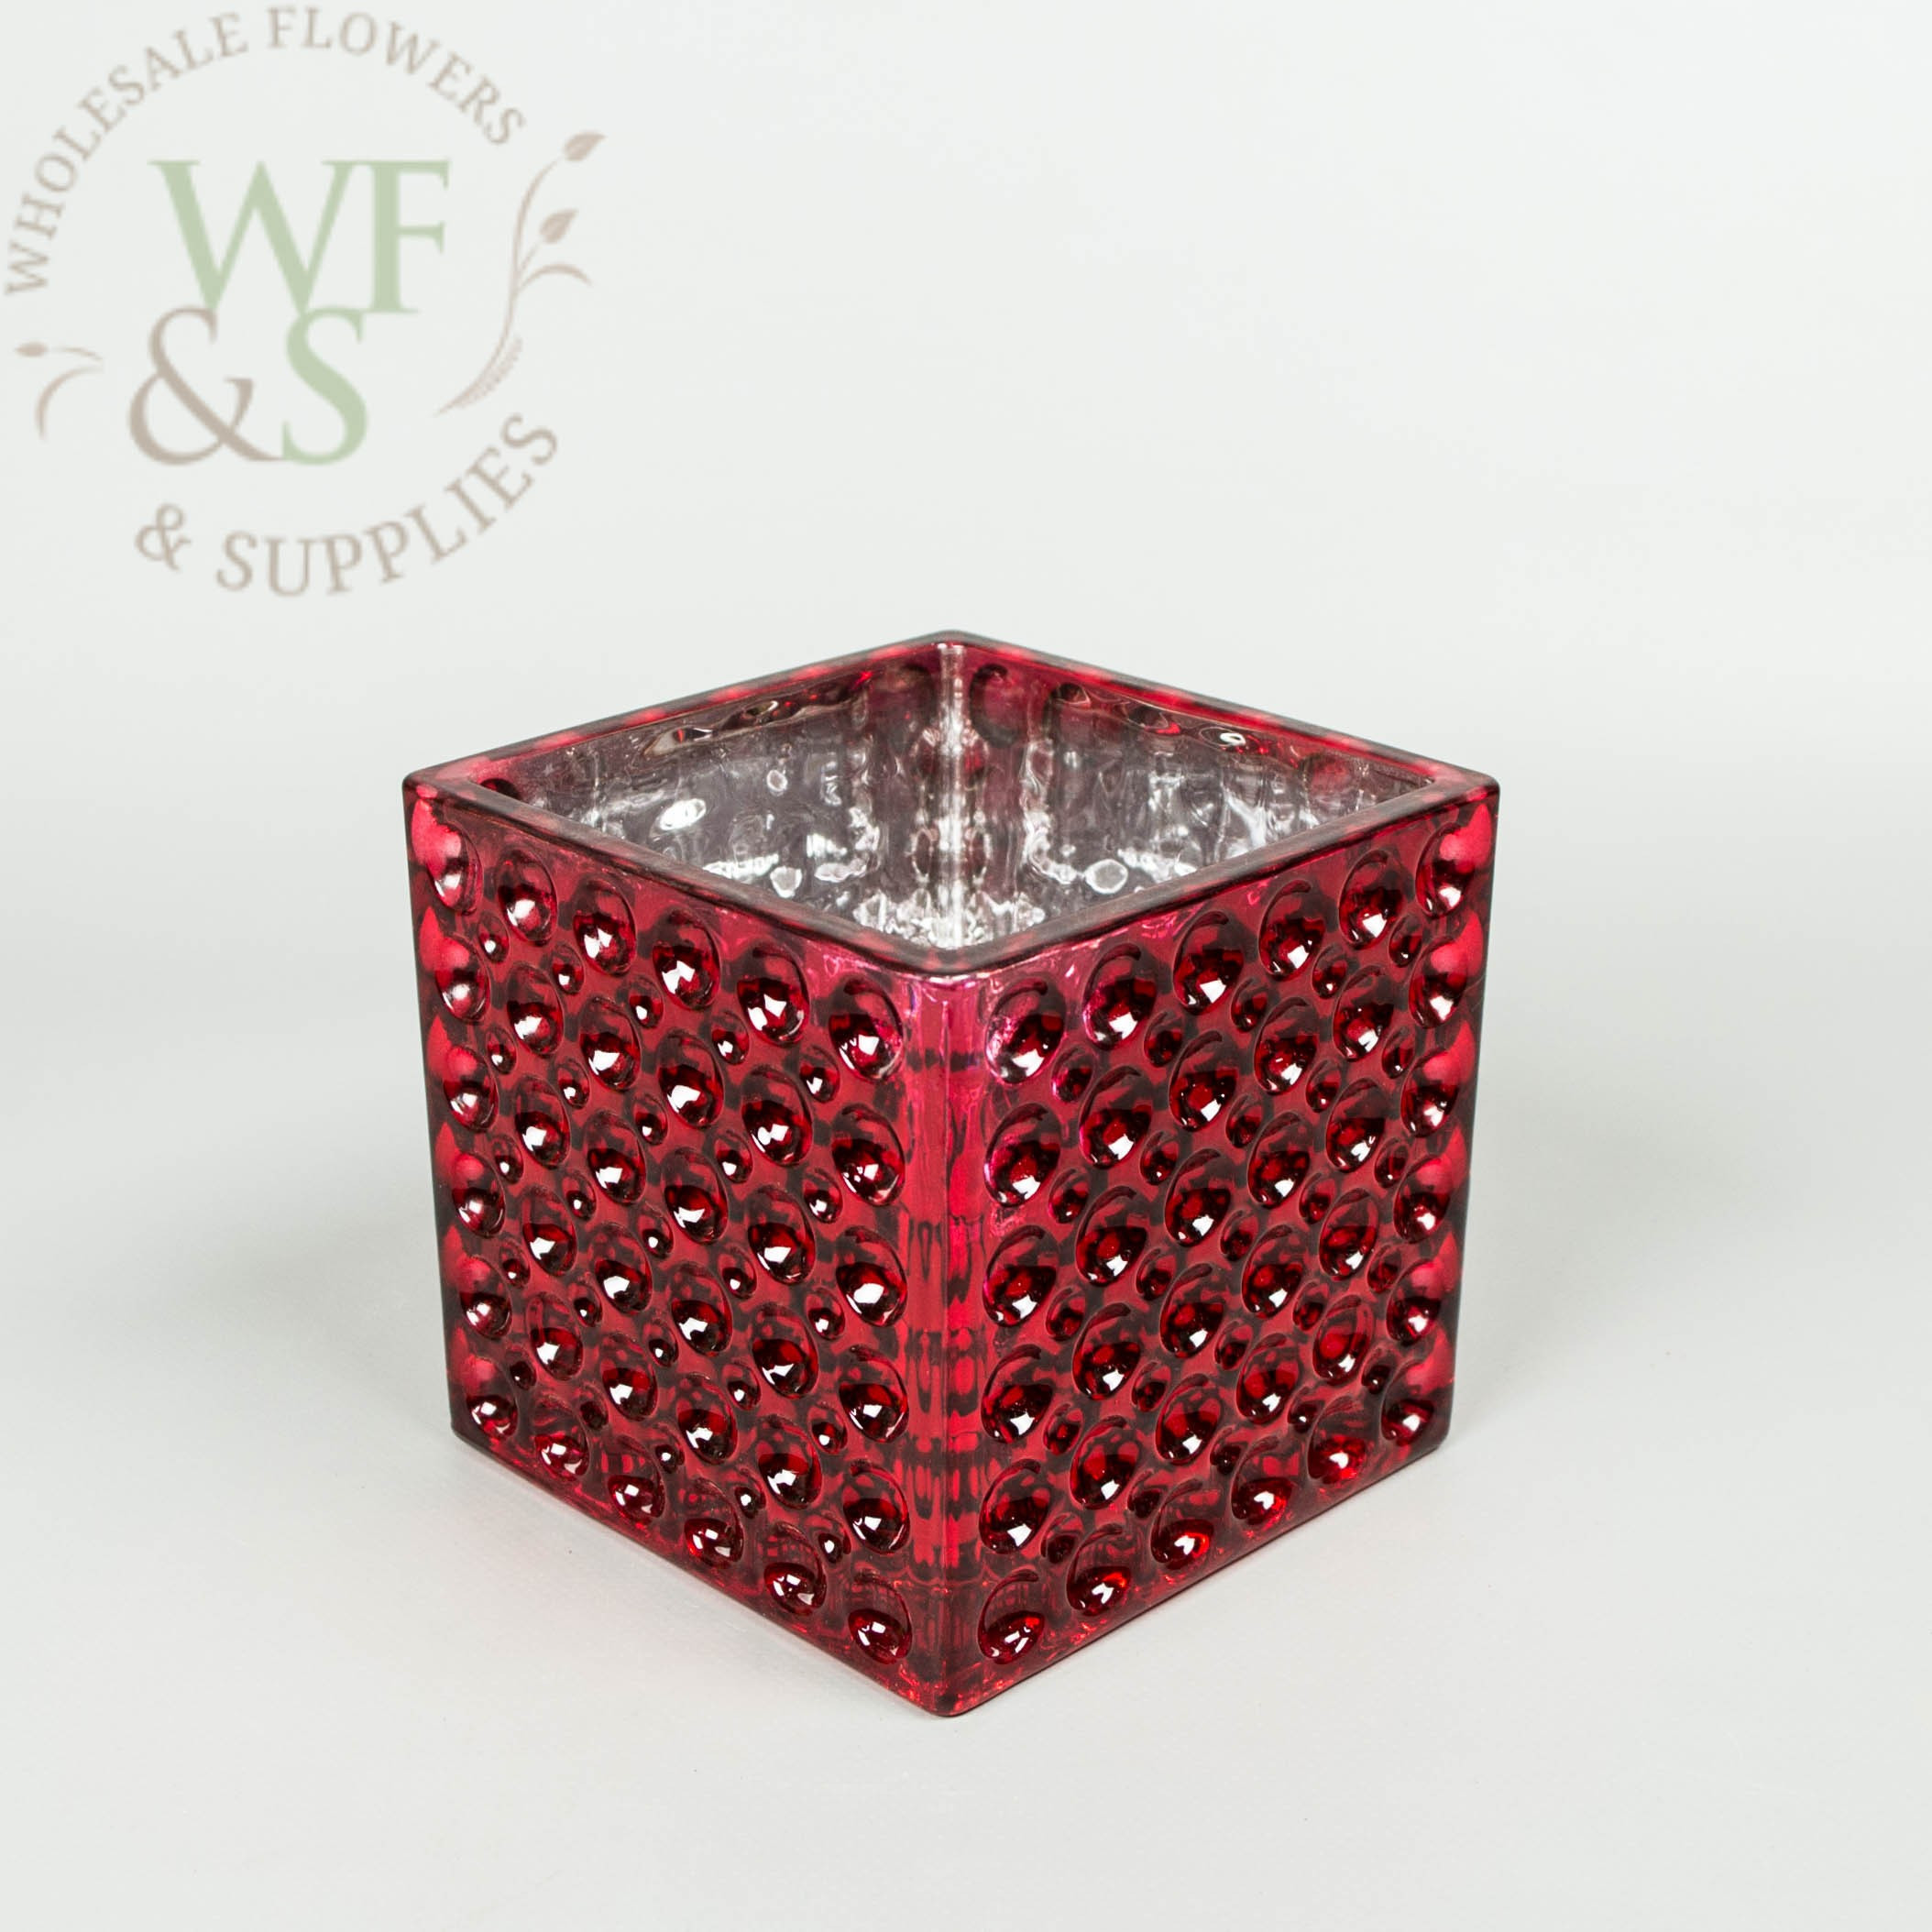 19 attractive 4x4 Glass Cube Vase 2024 free download 4x4 glass cube vase of square red mirrored glass cube vase dimple effect 5x5 wholesale with regard to square red mirrored glass cube vase dimple effect 5x5